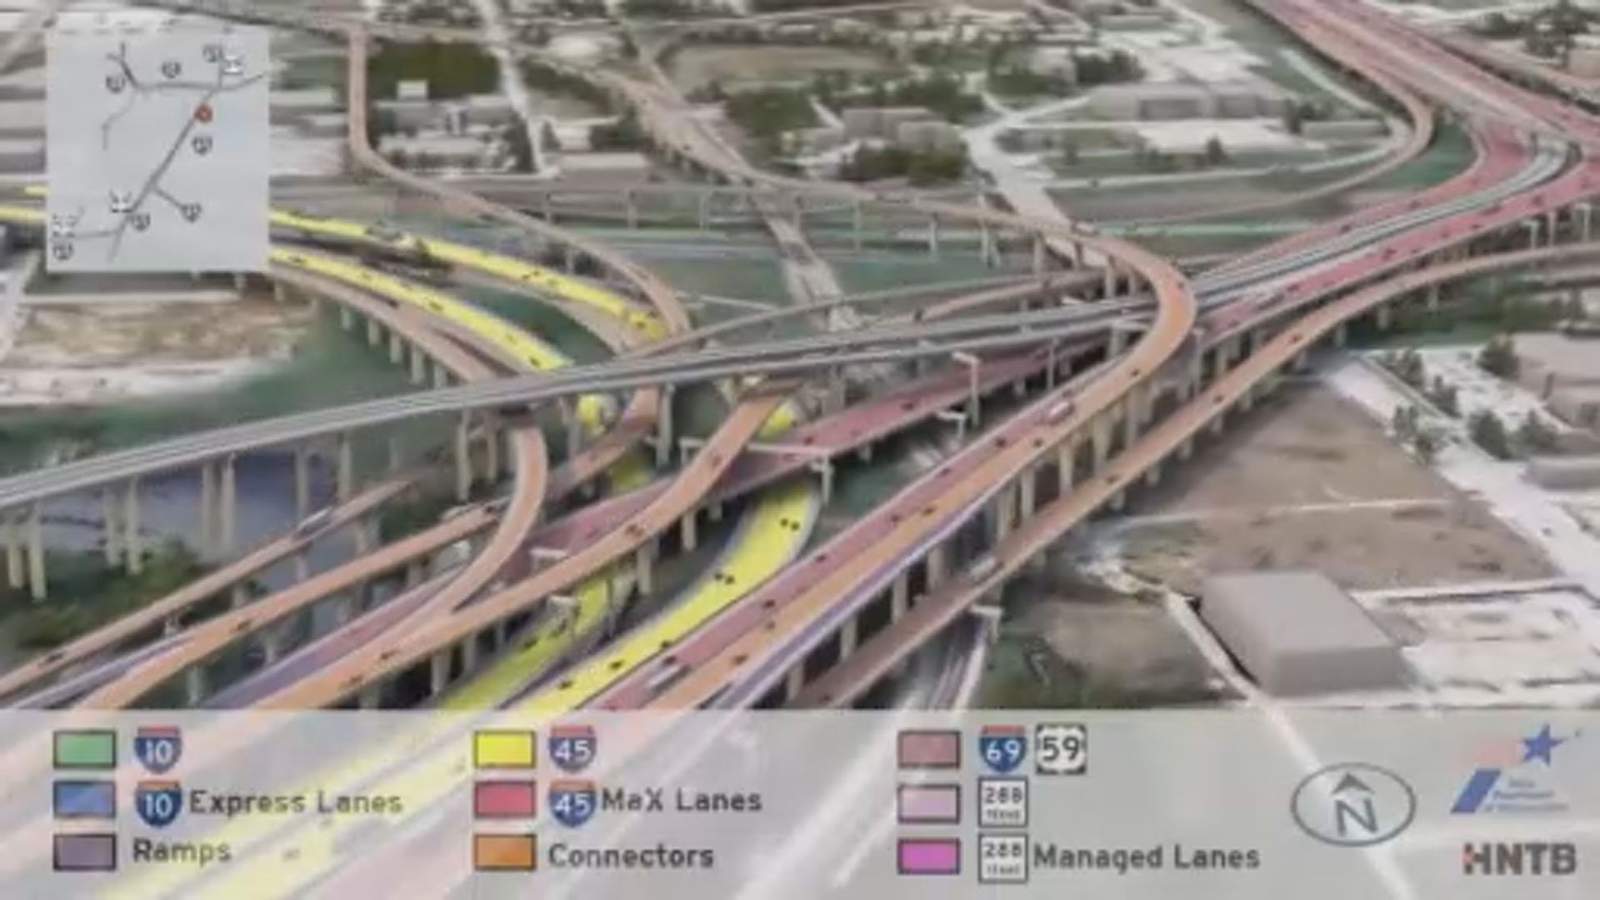 Leaders voice concerns over I-45 expansion project in letters to TxDOT